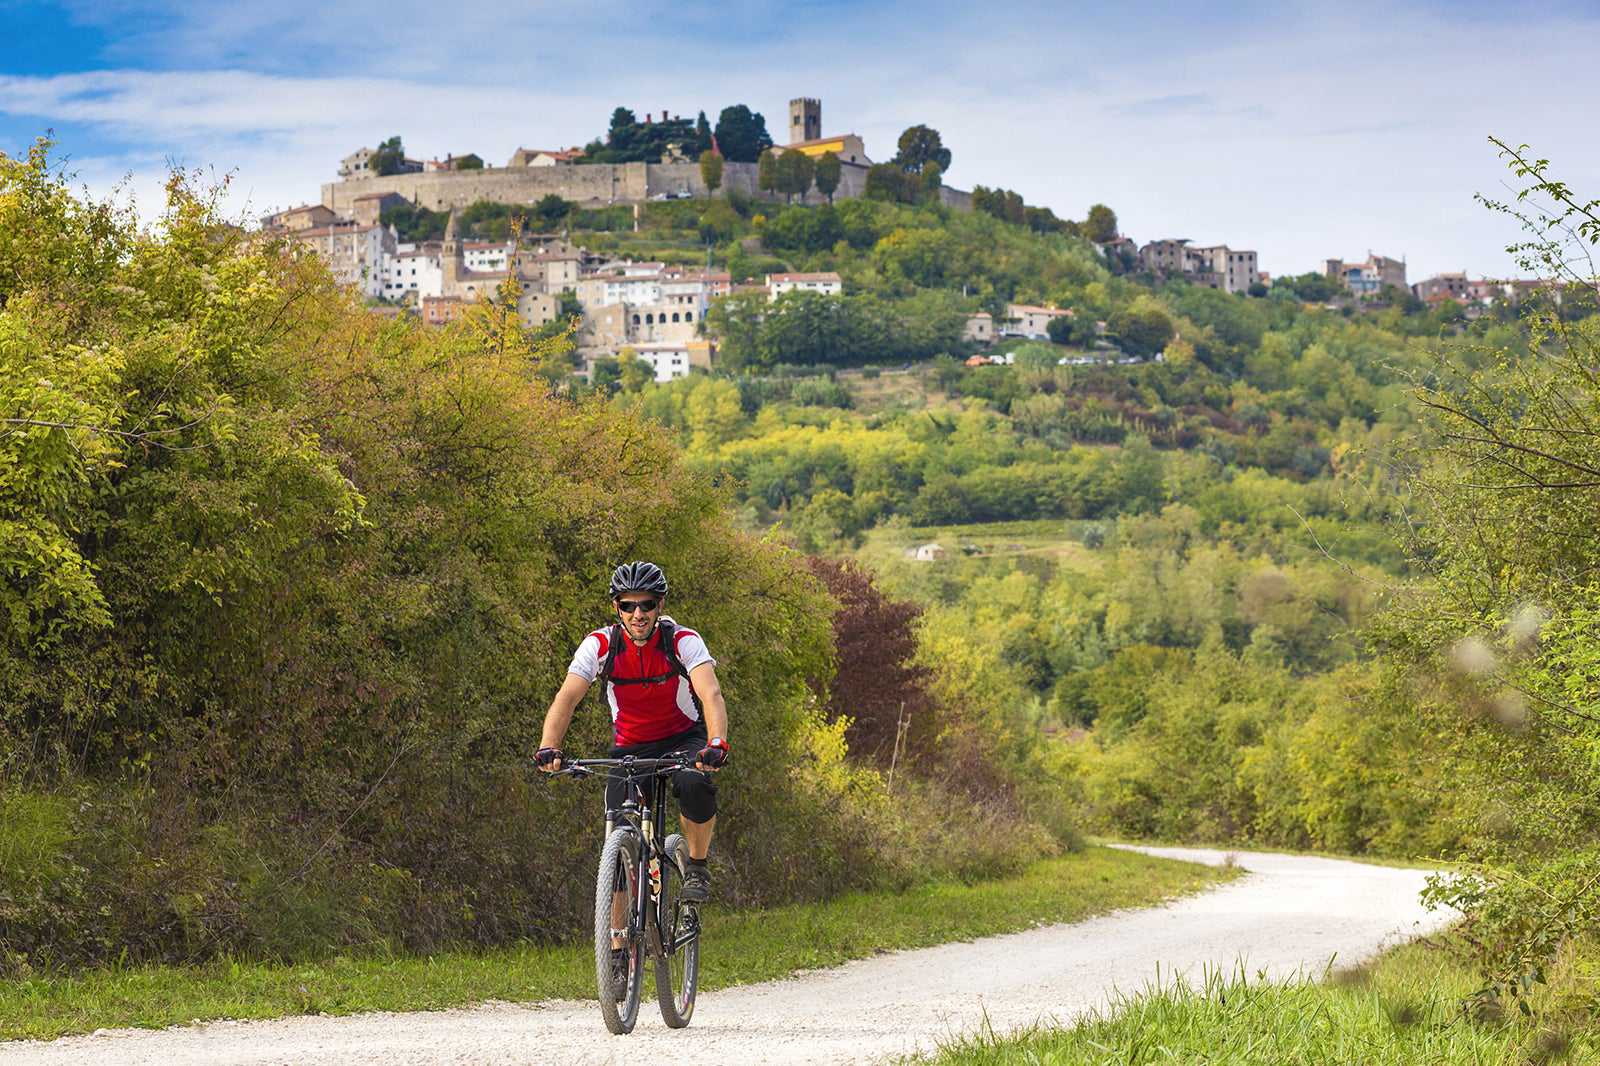 Hike or cycle the Parenzana trail 